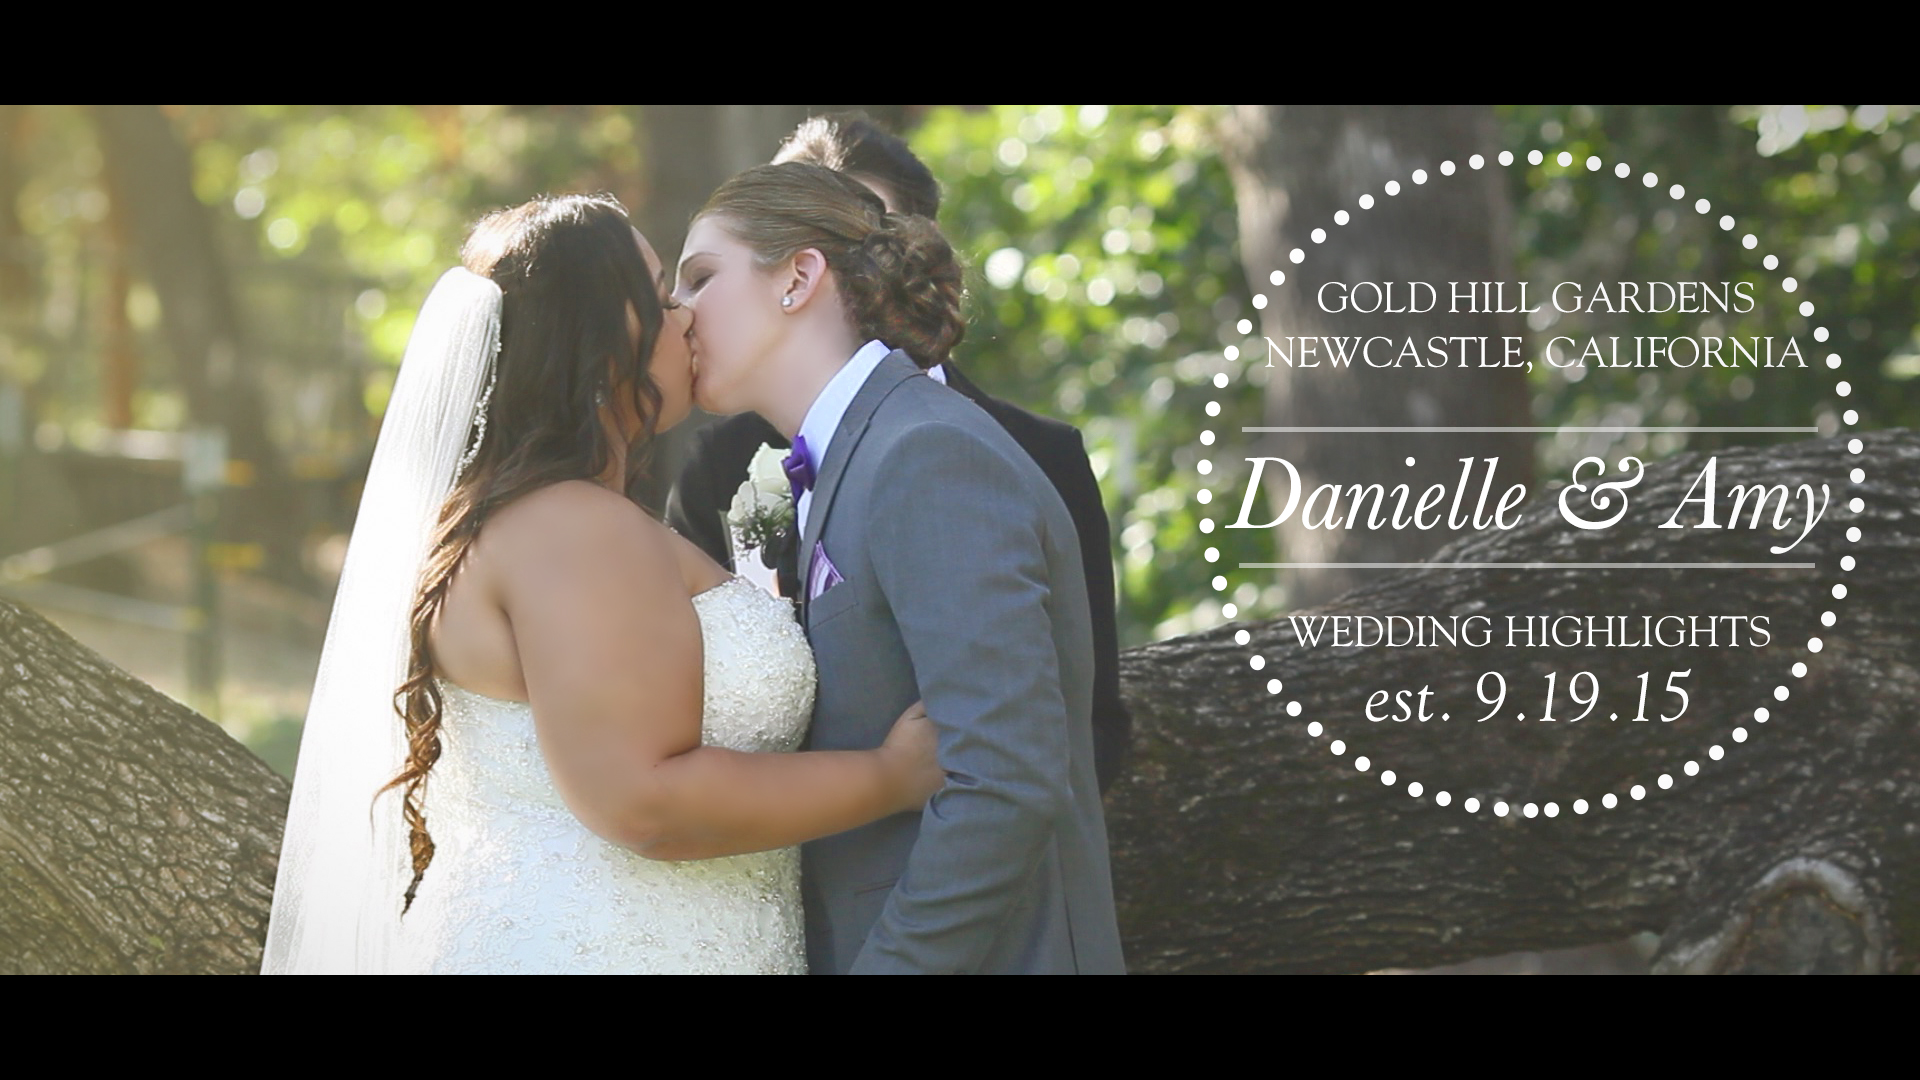 Danielle And Amy S Wedding At Gold Hill Gardens Newcastle